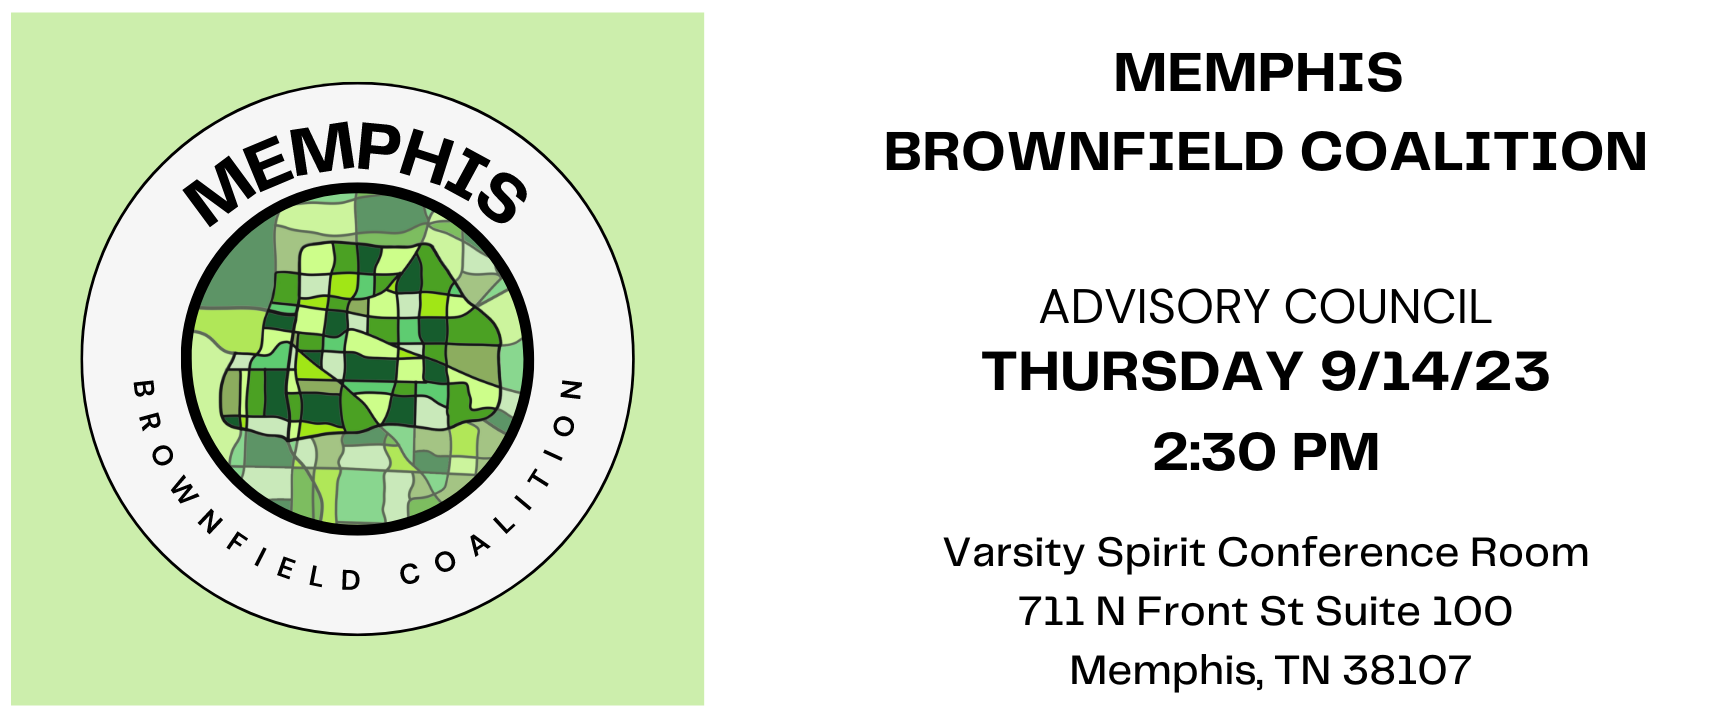 Next Brownfield Meeting September 14th 2023 at 2:30 PM at 711 N Front St Suite 100 Memphis, TN 38107